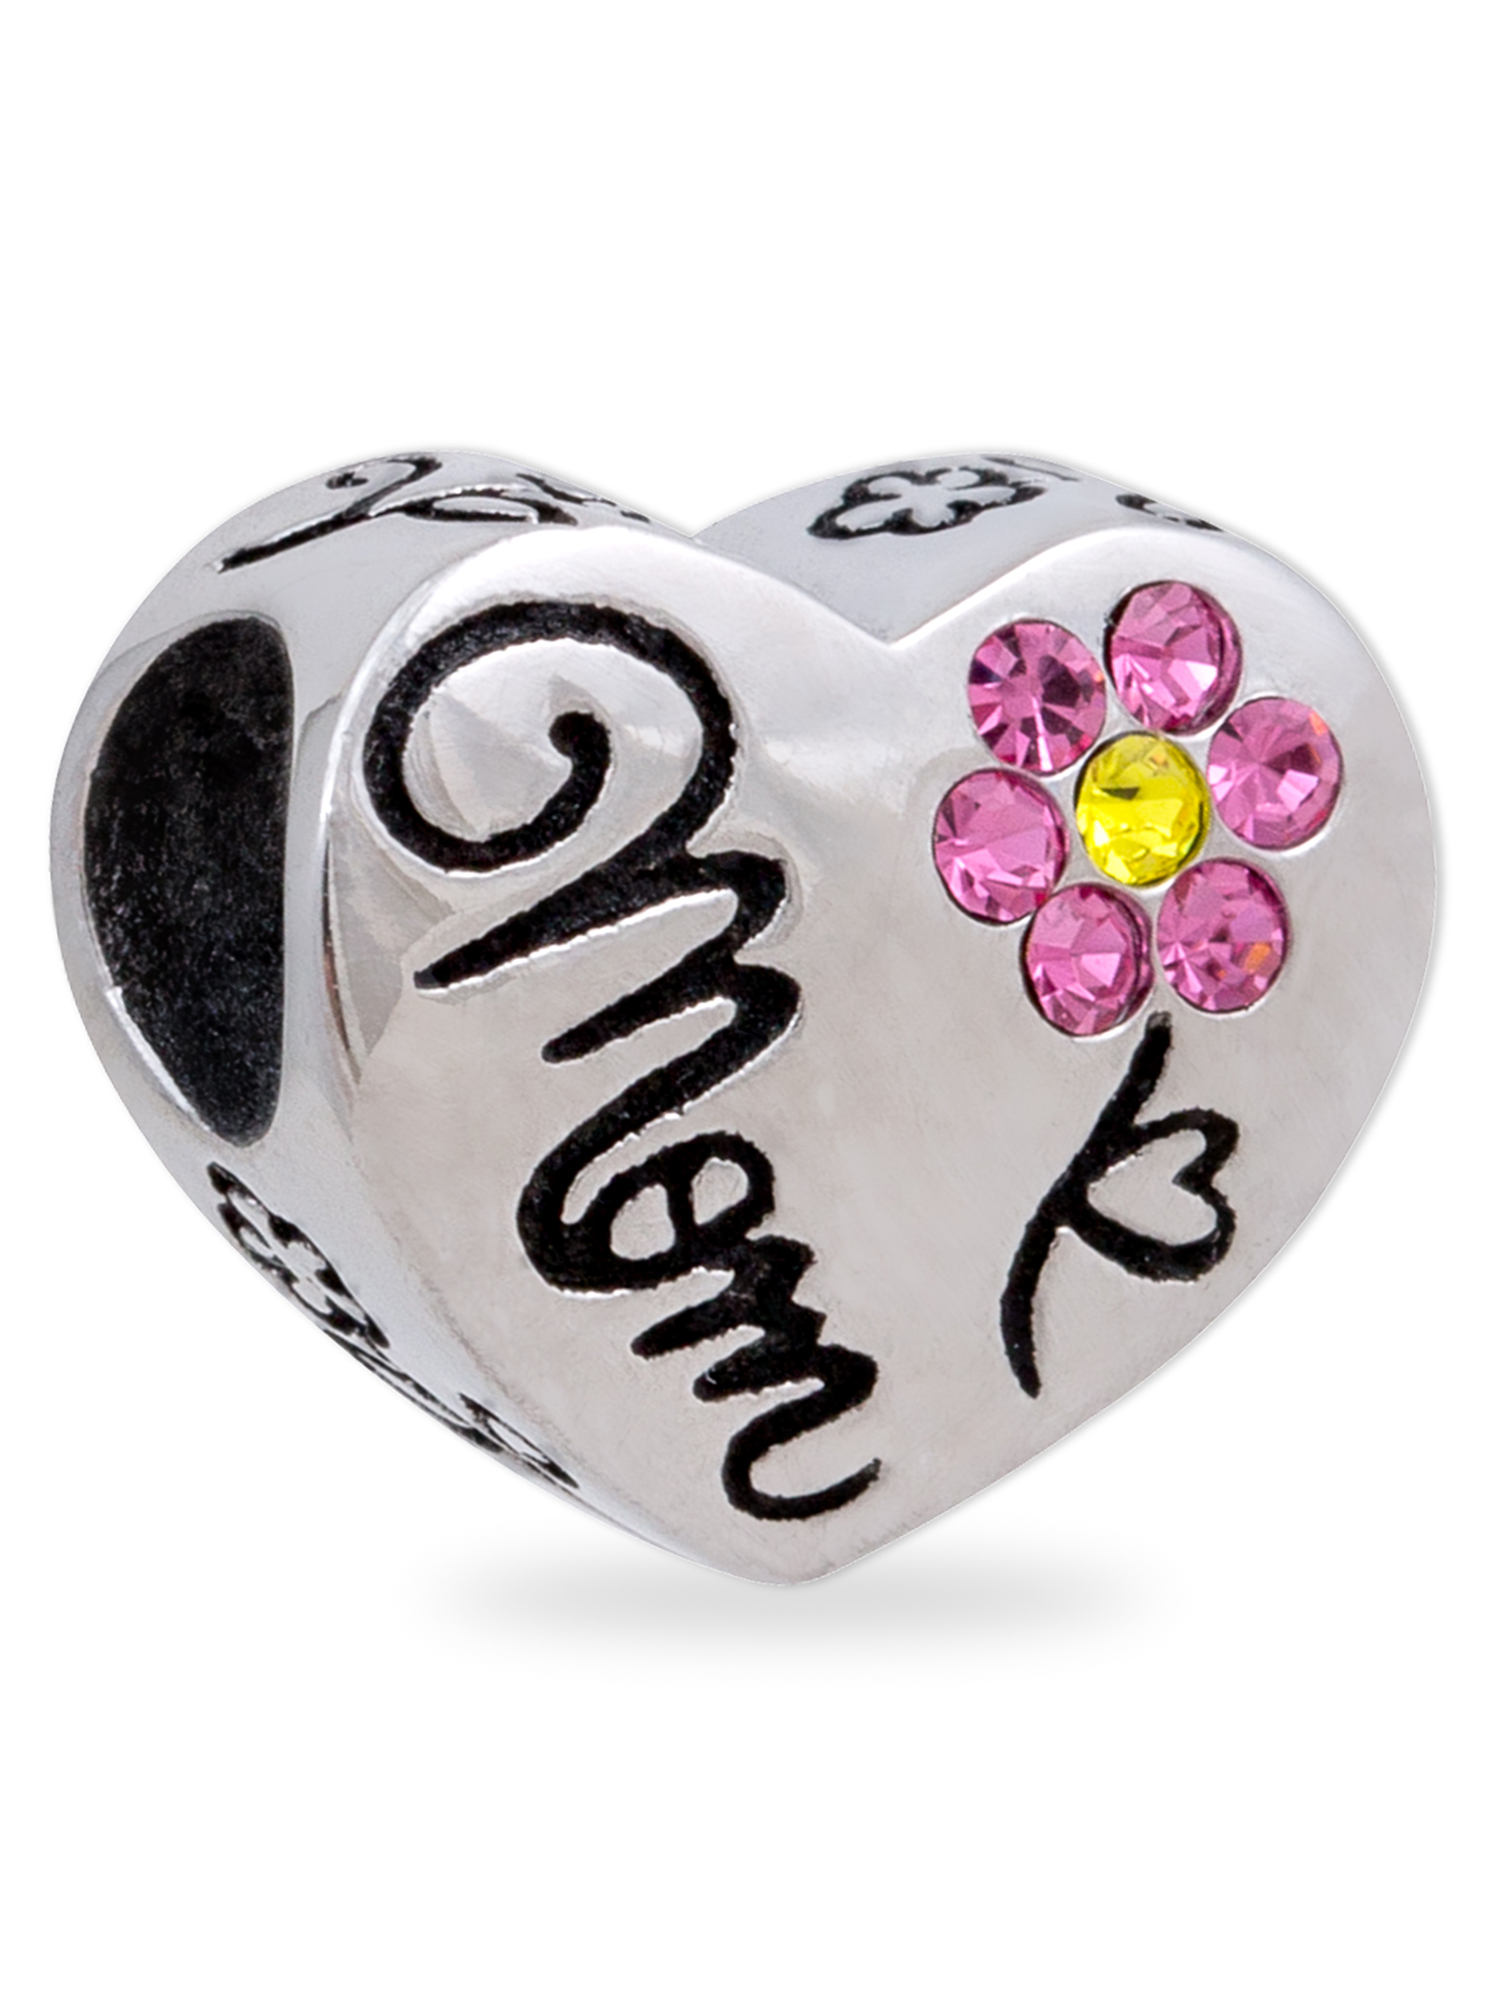 Stainless Steel Mom Crystal Heart Charm - image 1 of 2